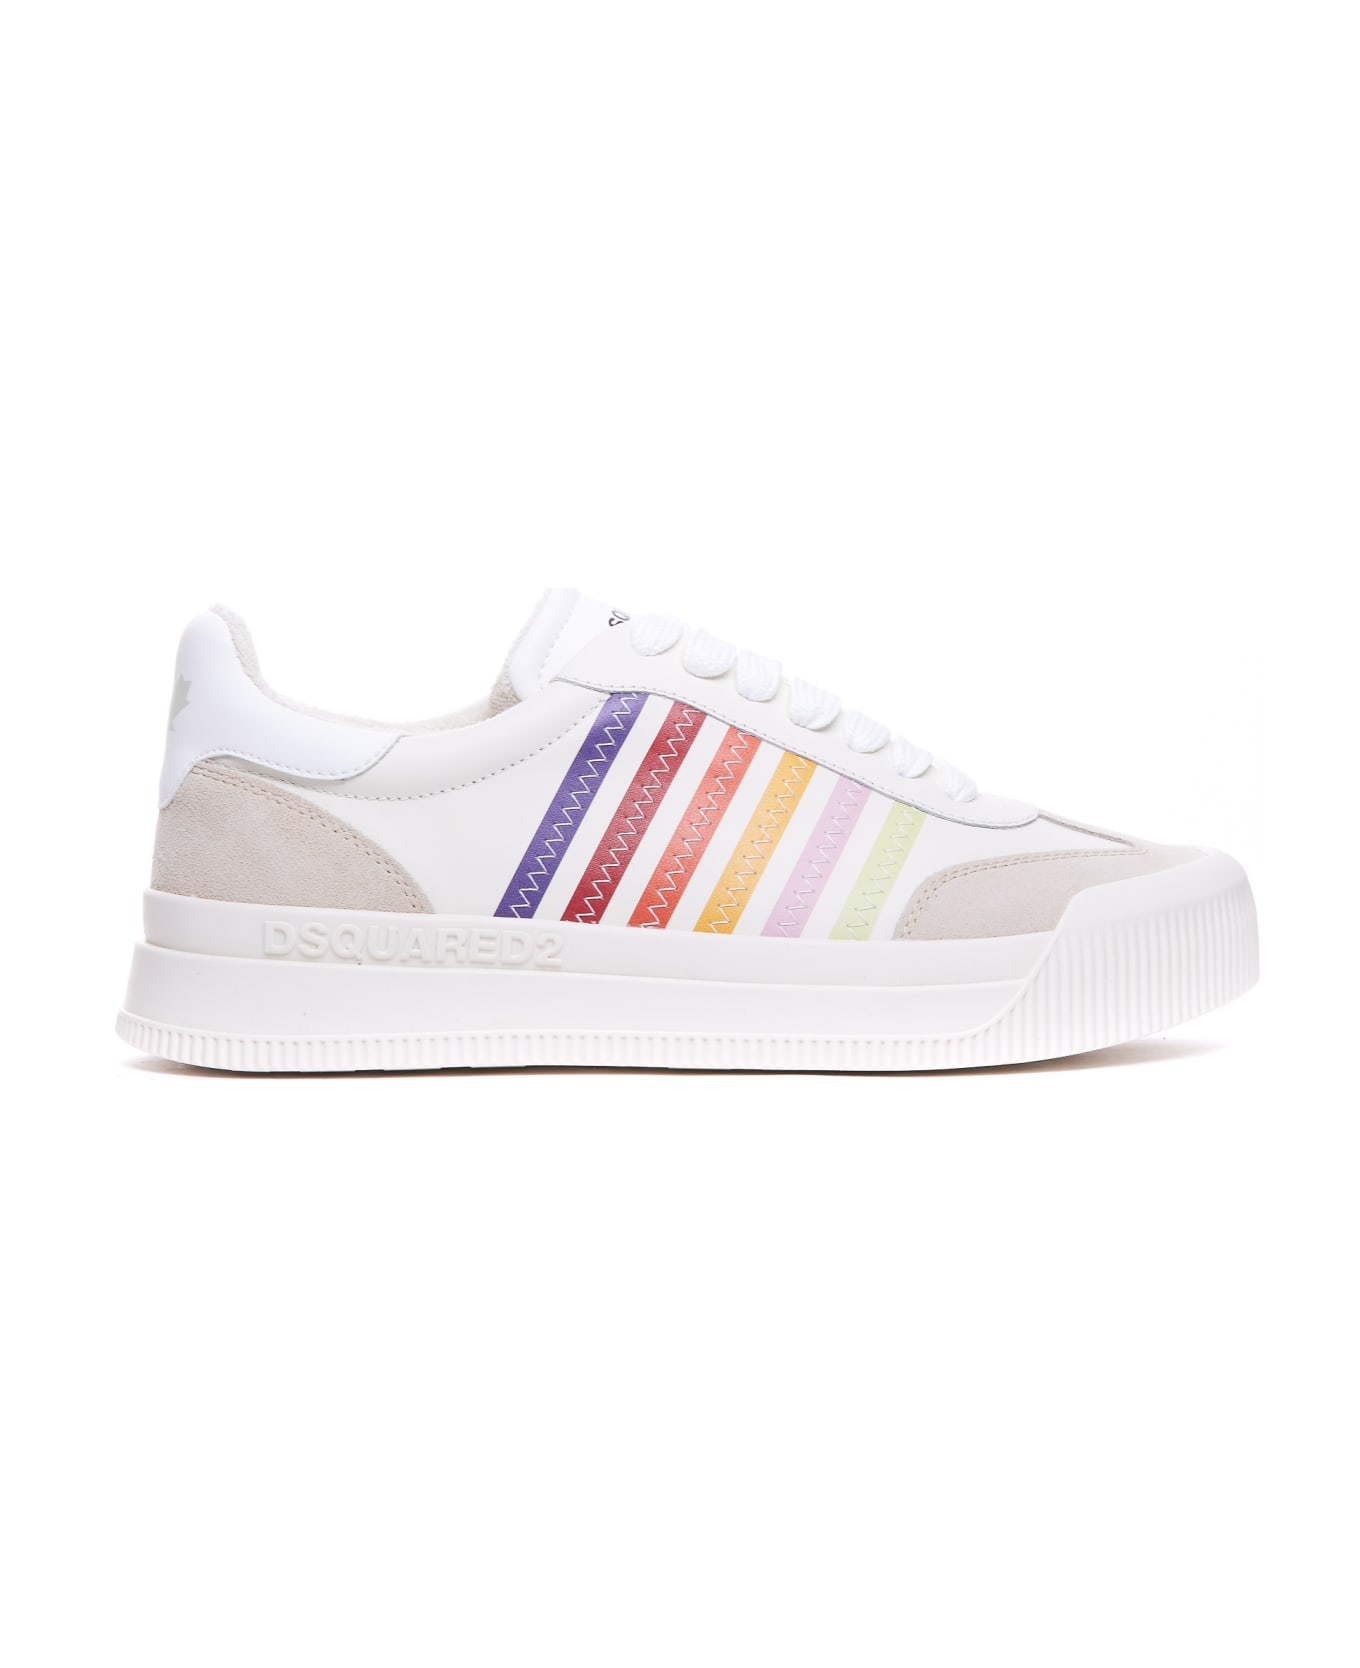 Dsquared2 New Jersey Lace-up Low Top Sneakers - Beige/multicolore